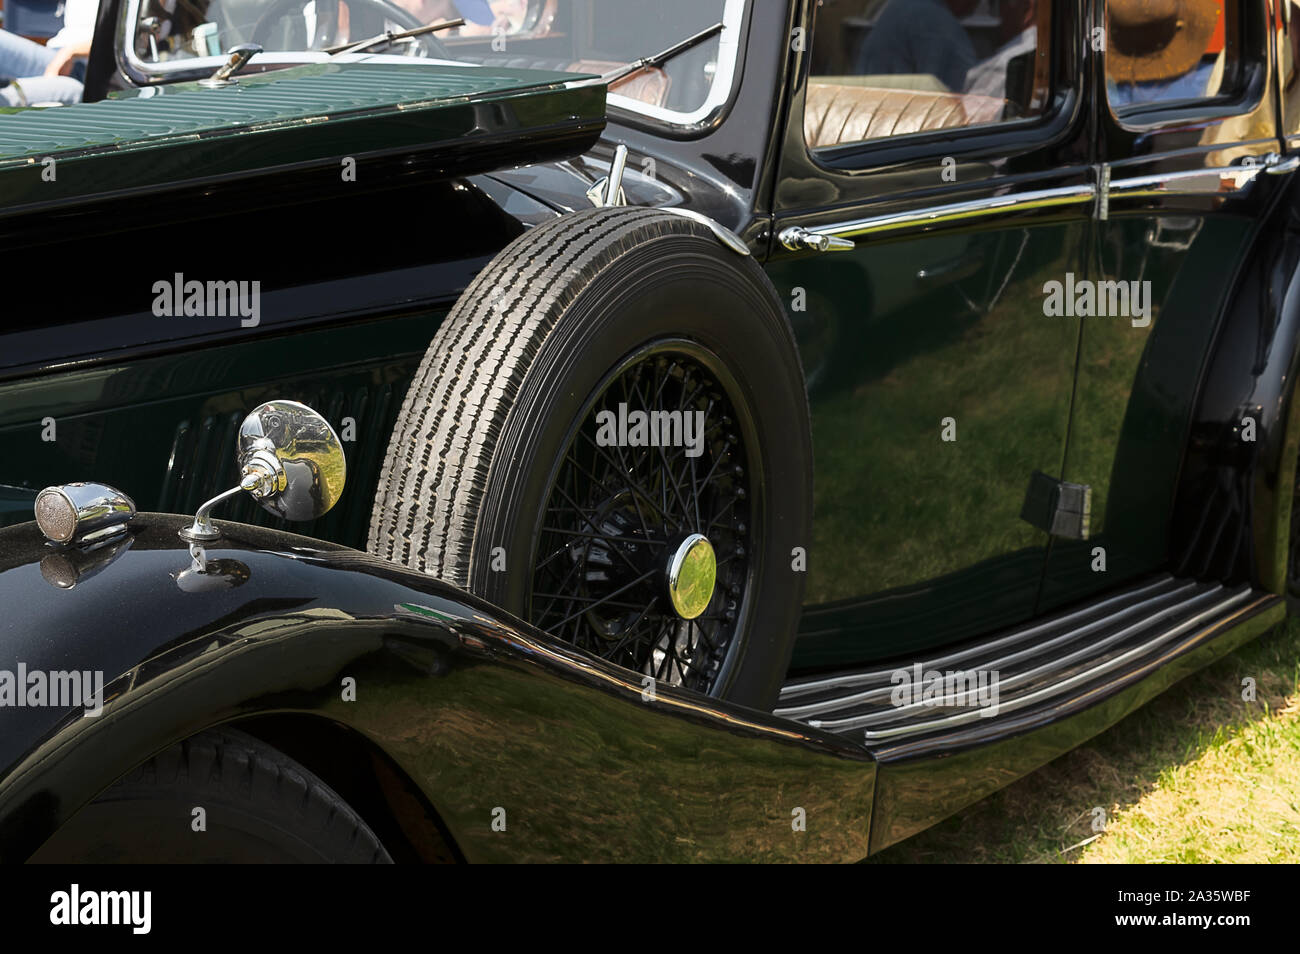 The side of a green 1940's Alvis roadster Stock Photo